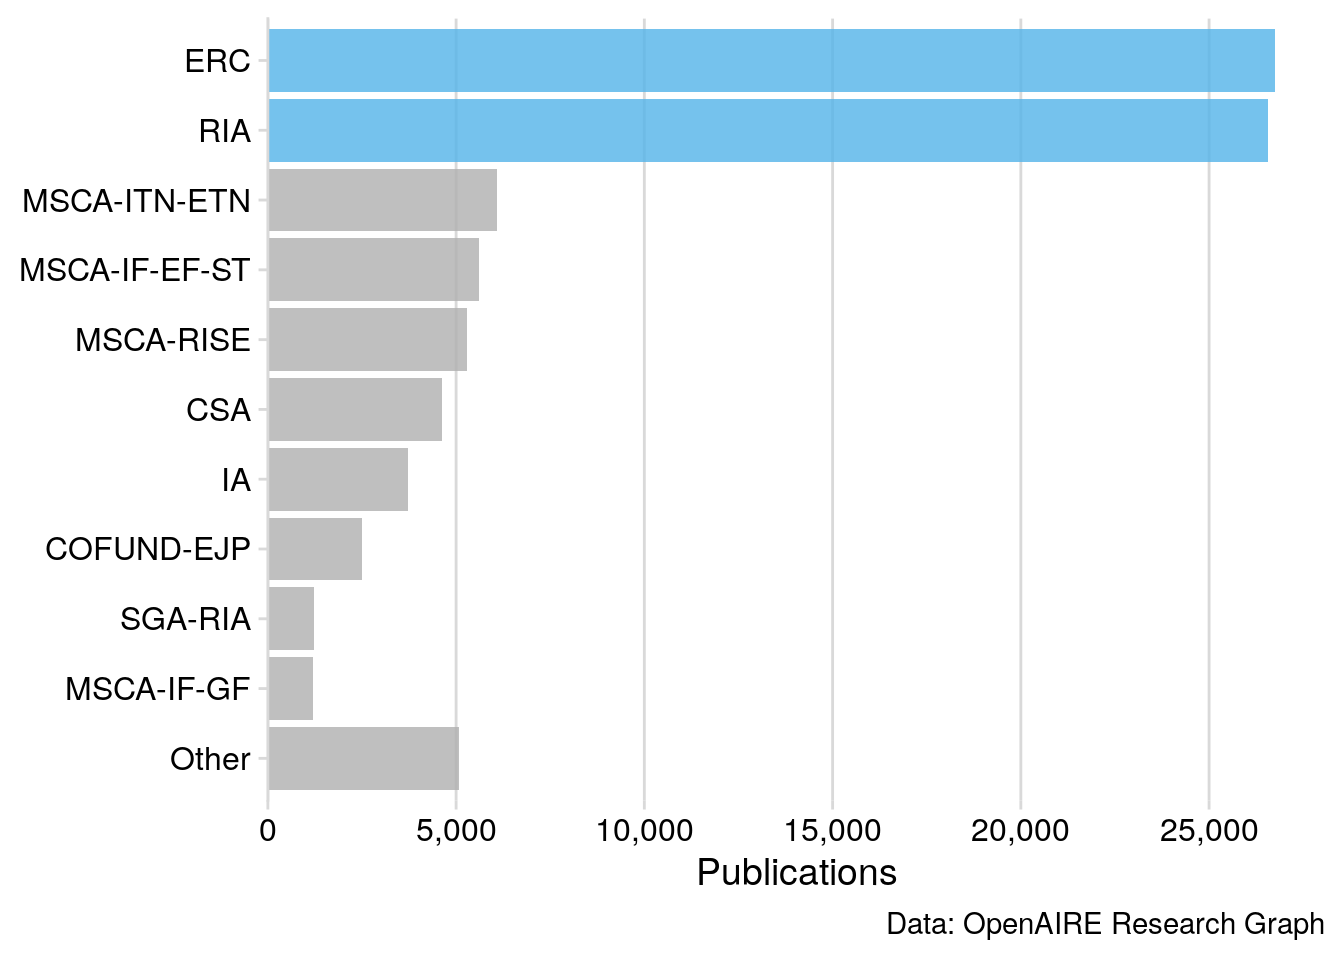 Publication Output of Horizon 2020 funding activities captured by the OpenAIRE Research Graph, released in December 2019.